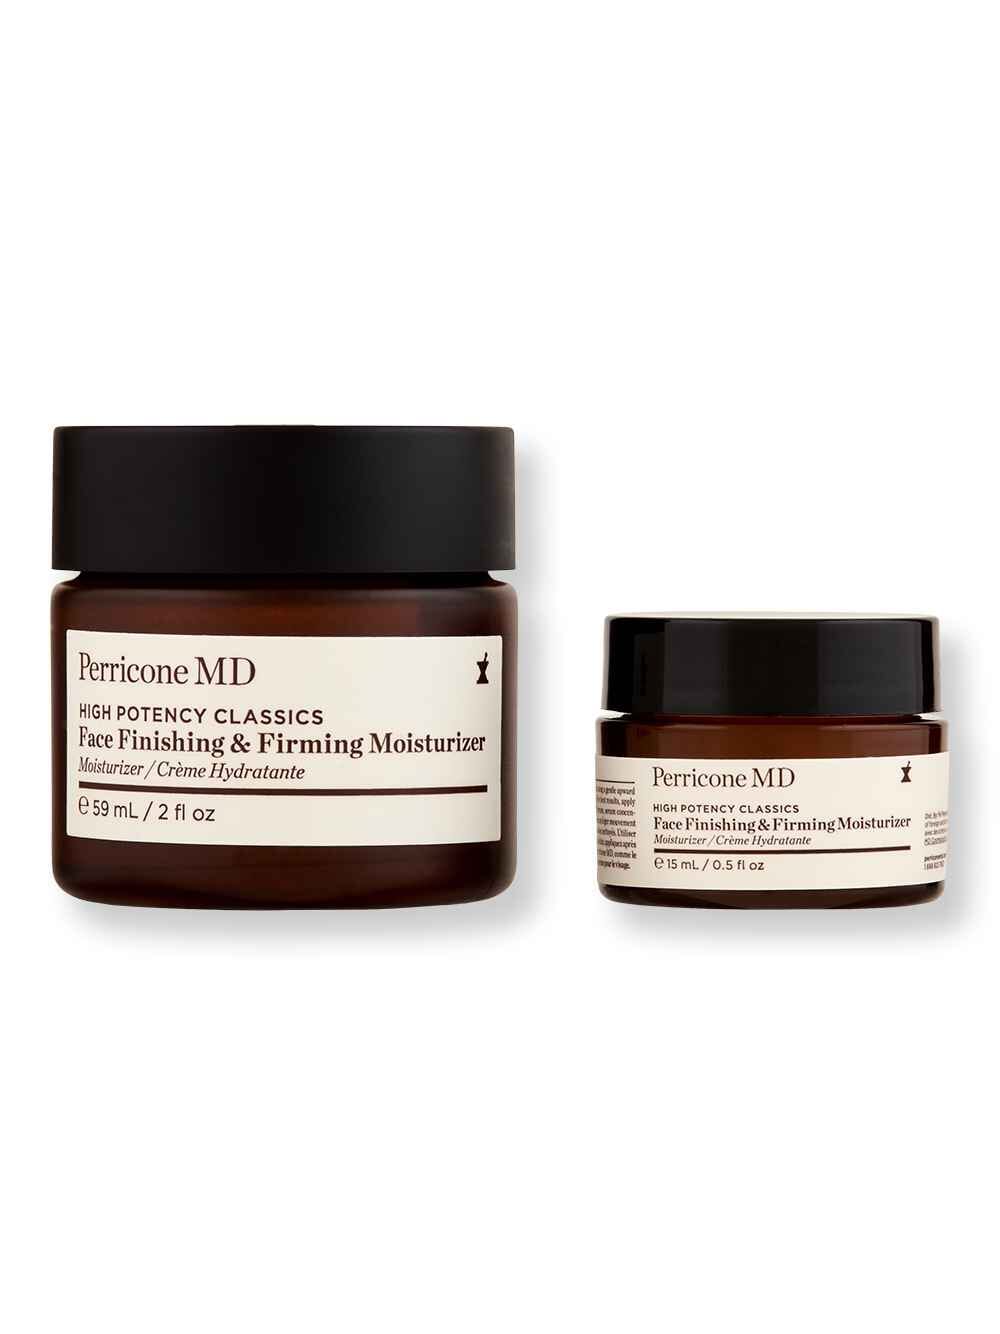 Perricone MD Perricone MD High Potency Classics Face Finishing & Firming Moisturizer Home & Away Duo Face Moisturizers 